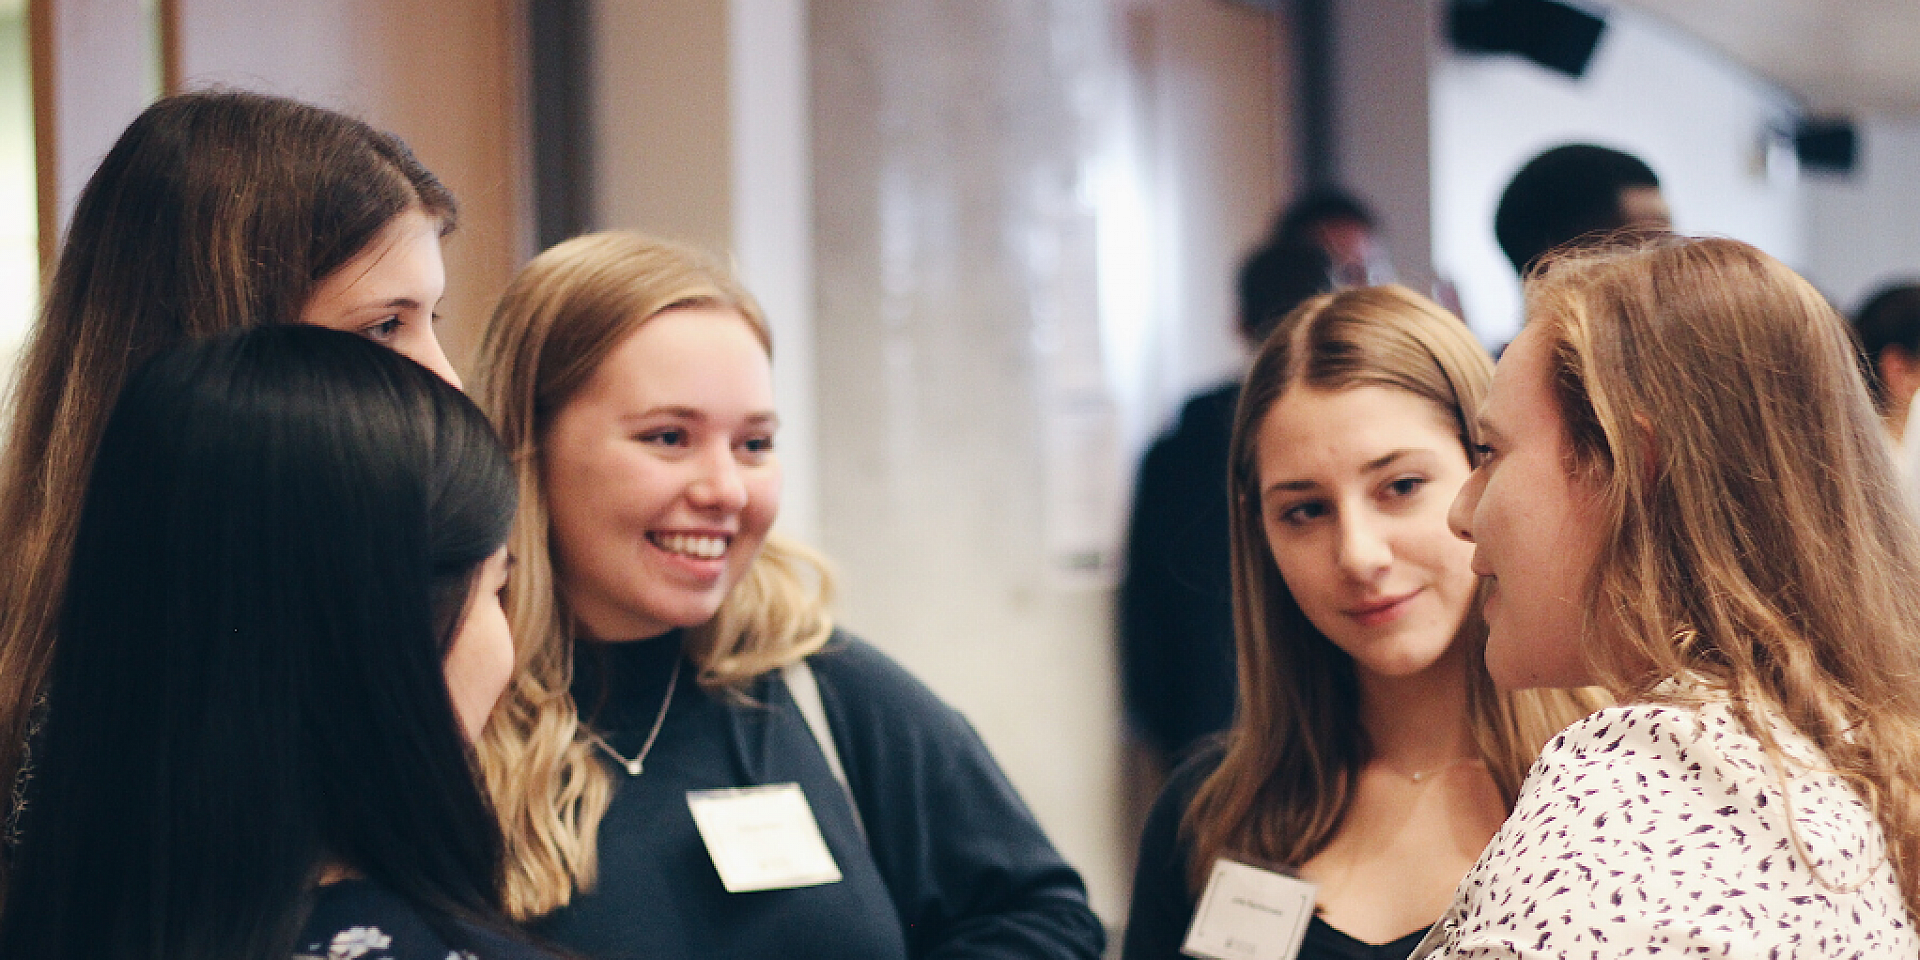 Students speaking at a networking event